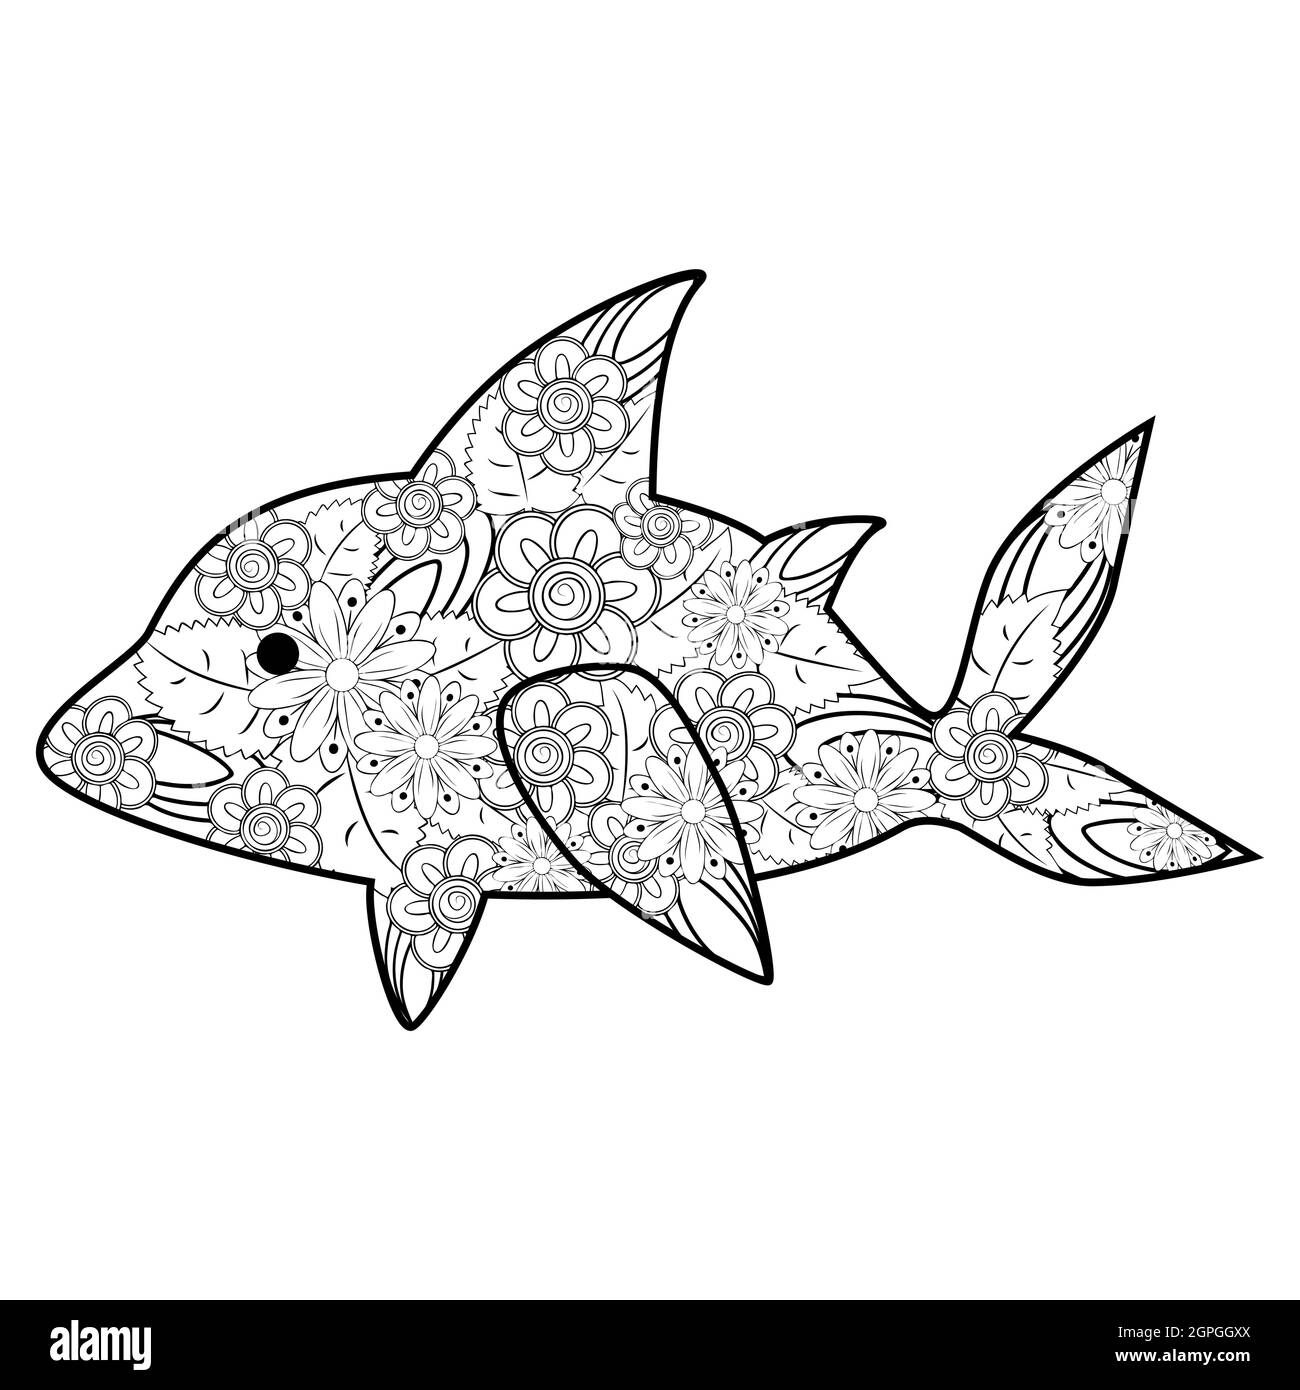 Hand drawn zentangle shark illustration decorative abstract doodle design element coloring book for adults stock vector image art